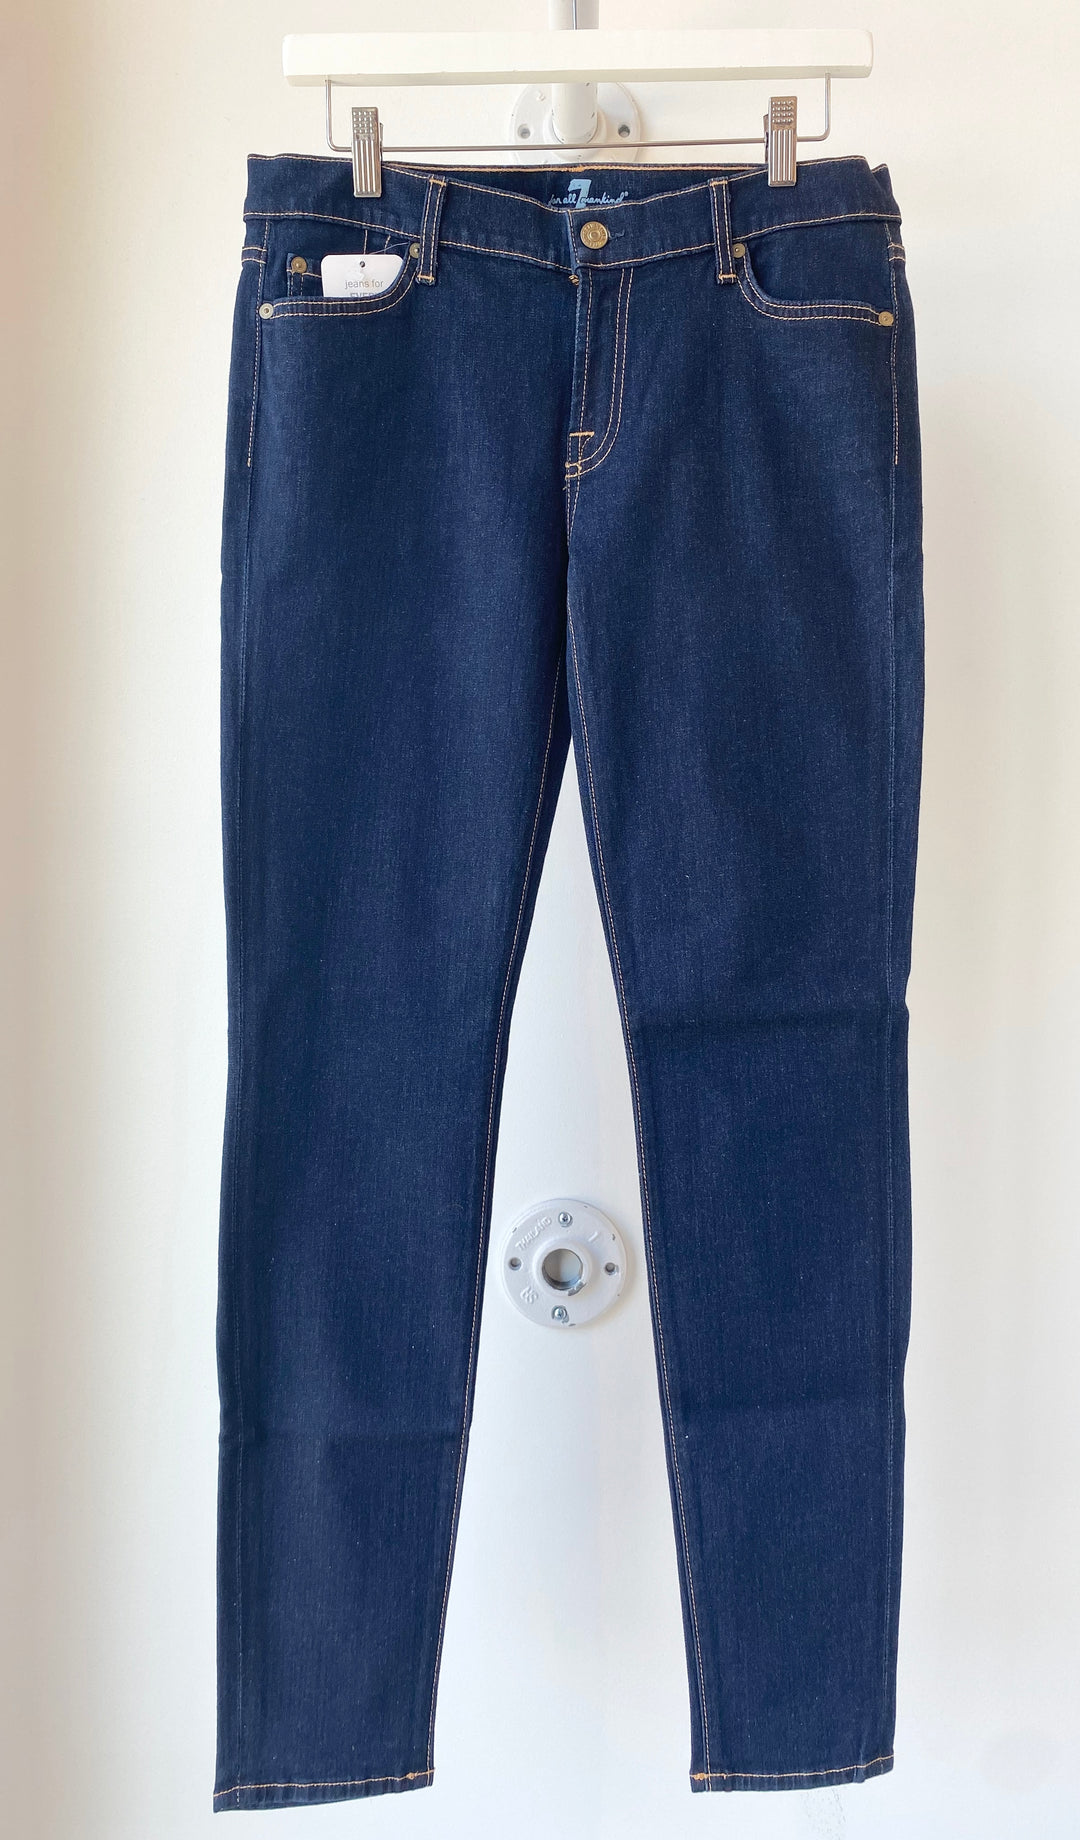 Seven for all Mankind - The Skinny in RIND